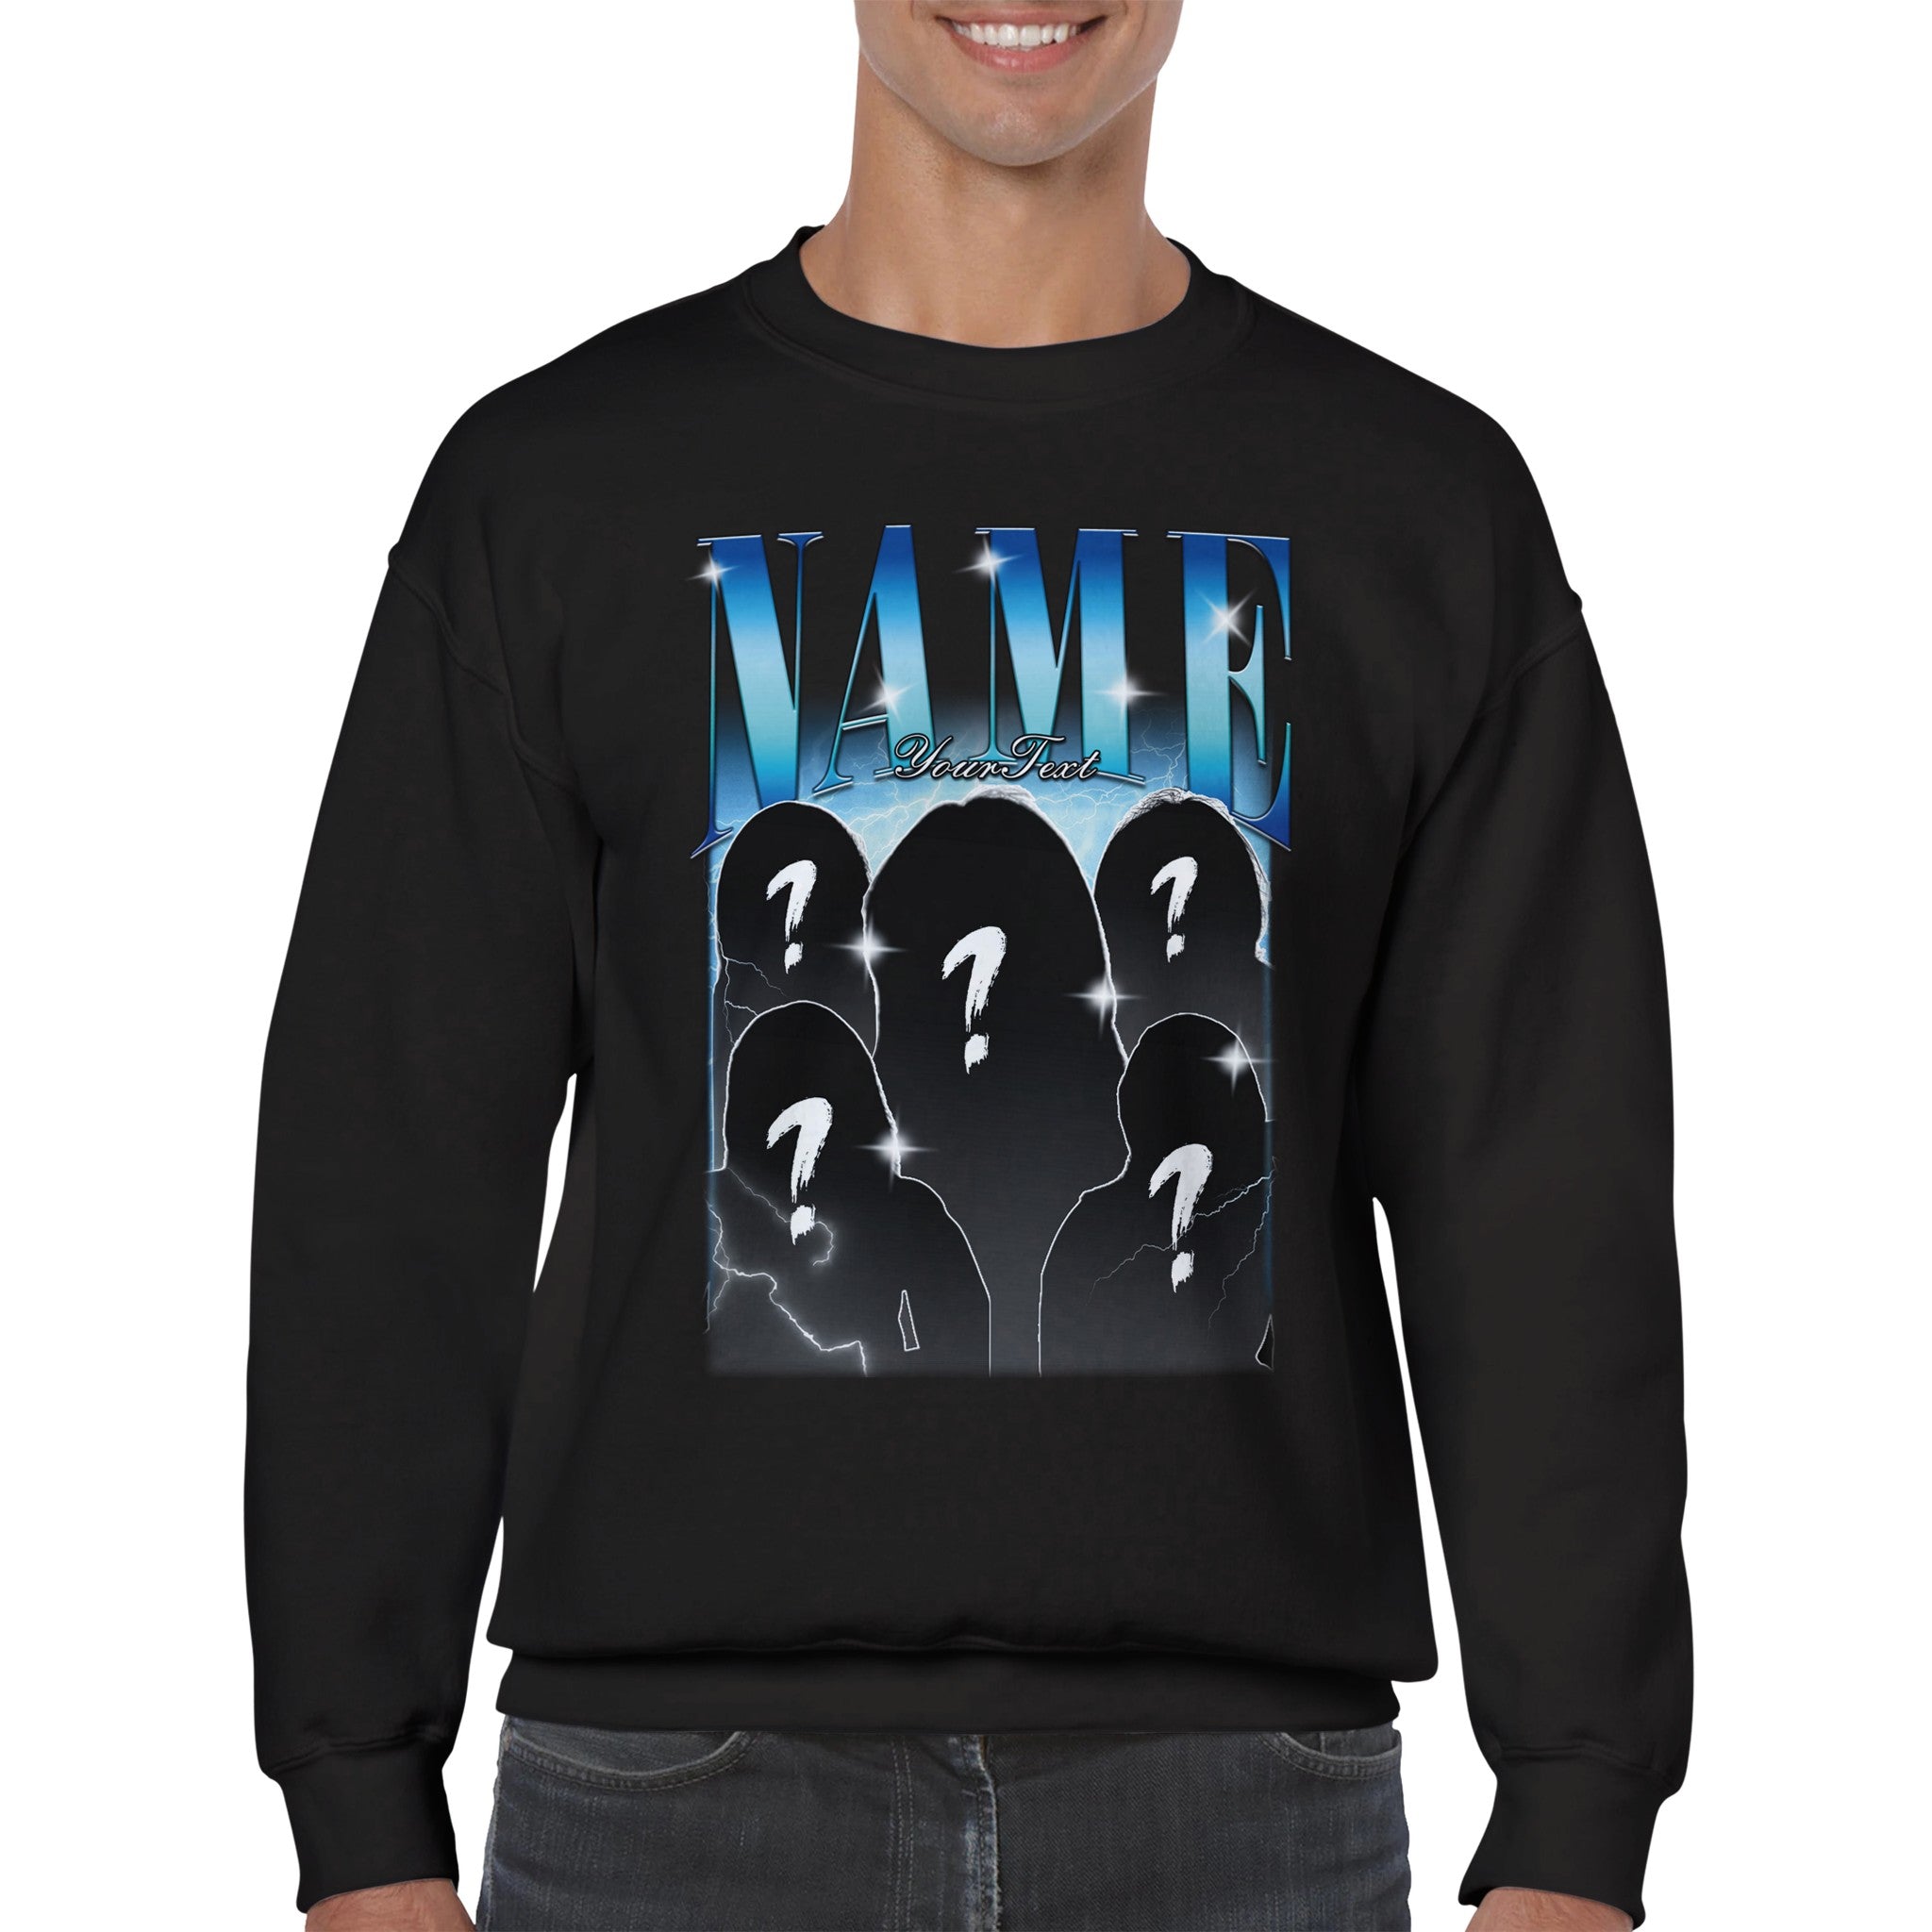 Personalized Bootleg Sweatshirt with your pictures